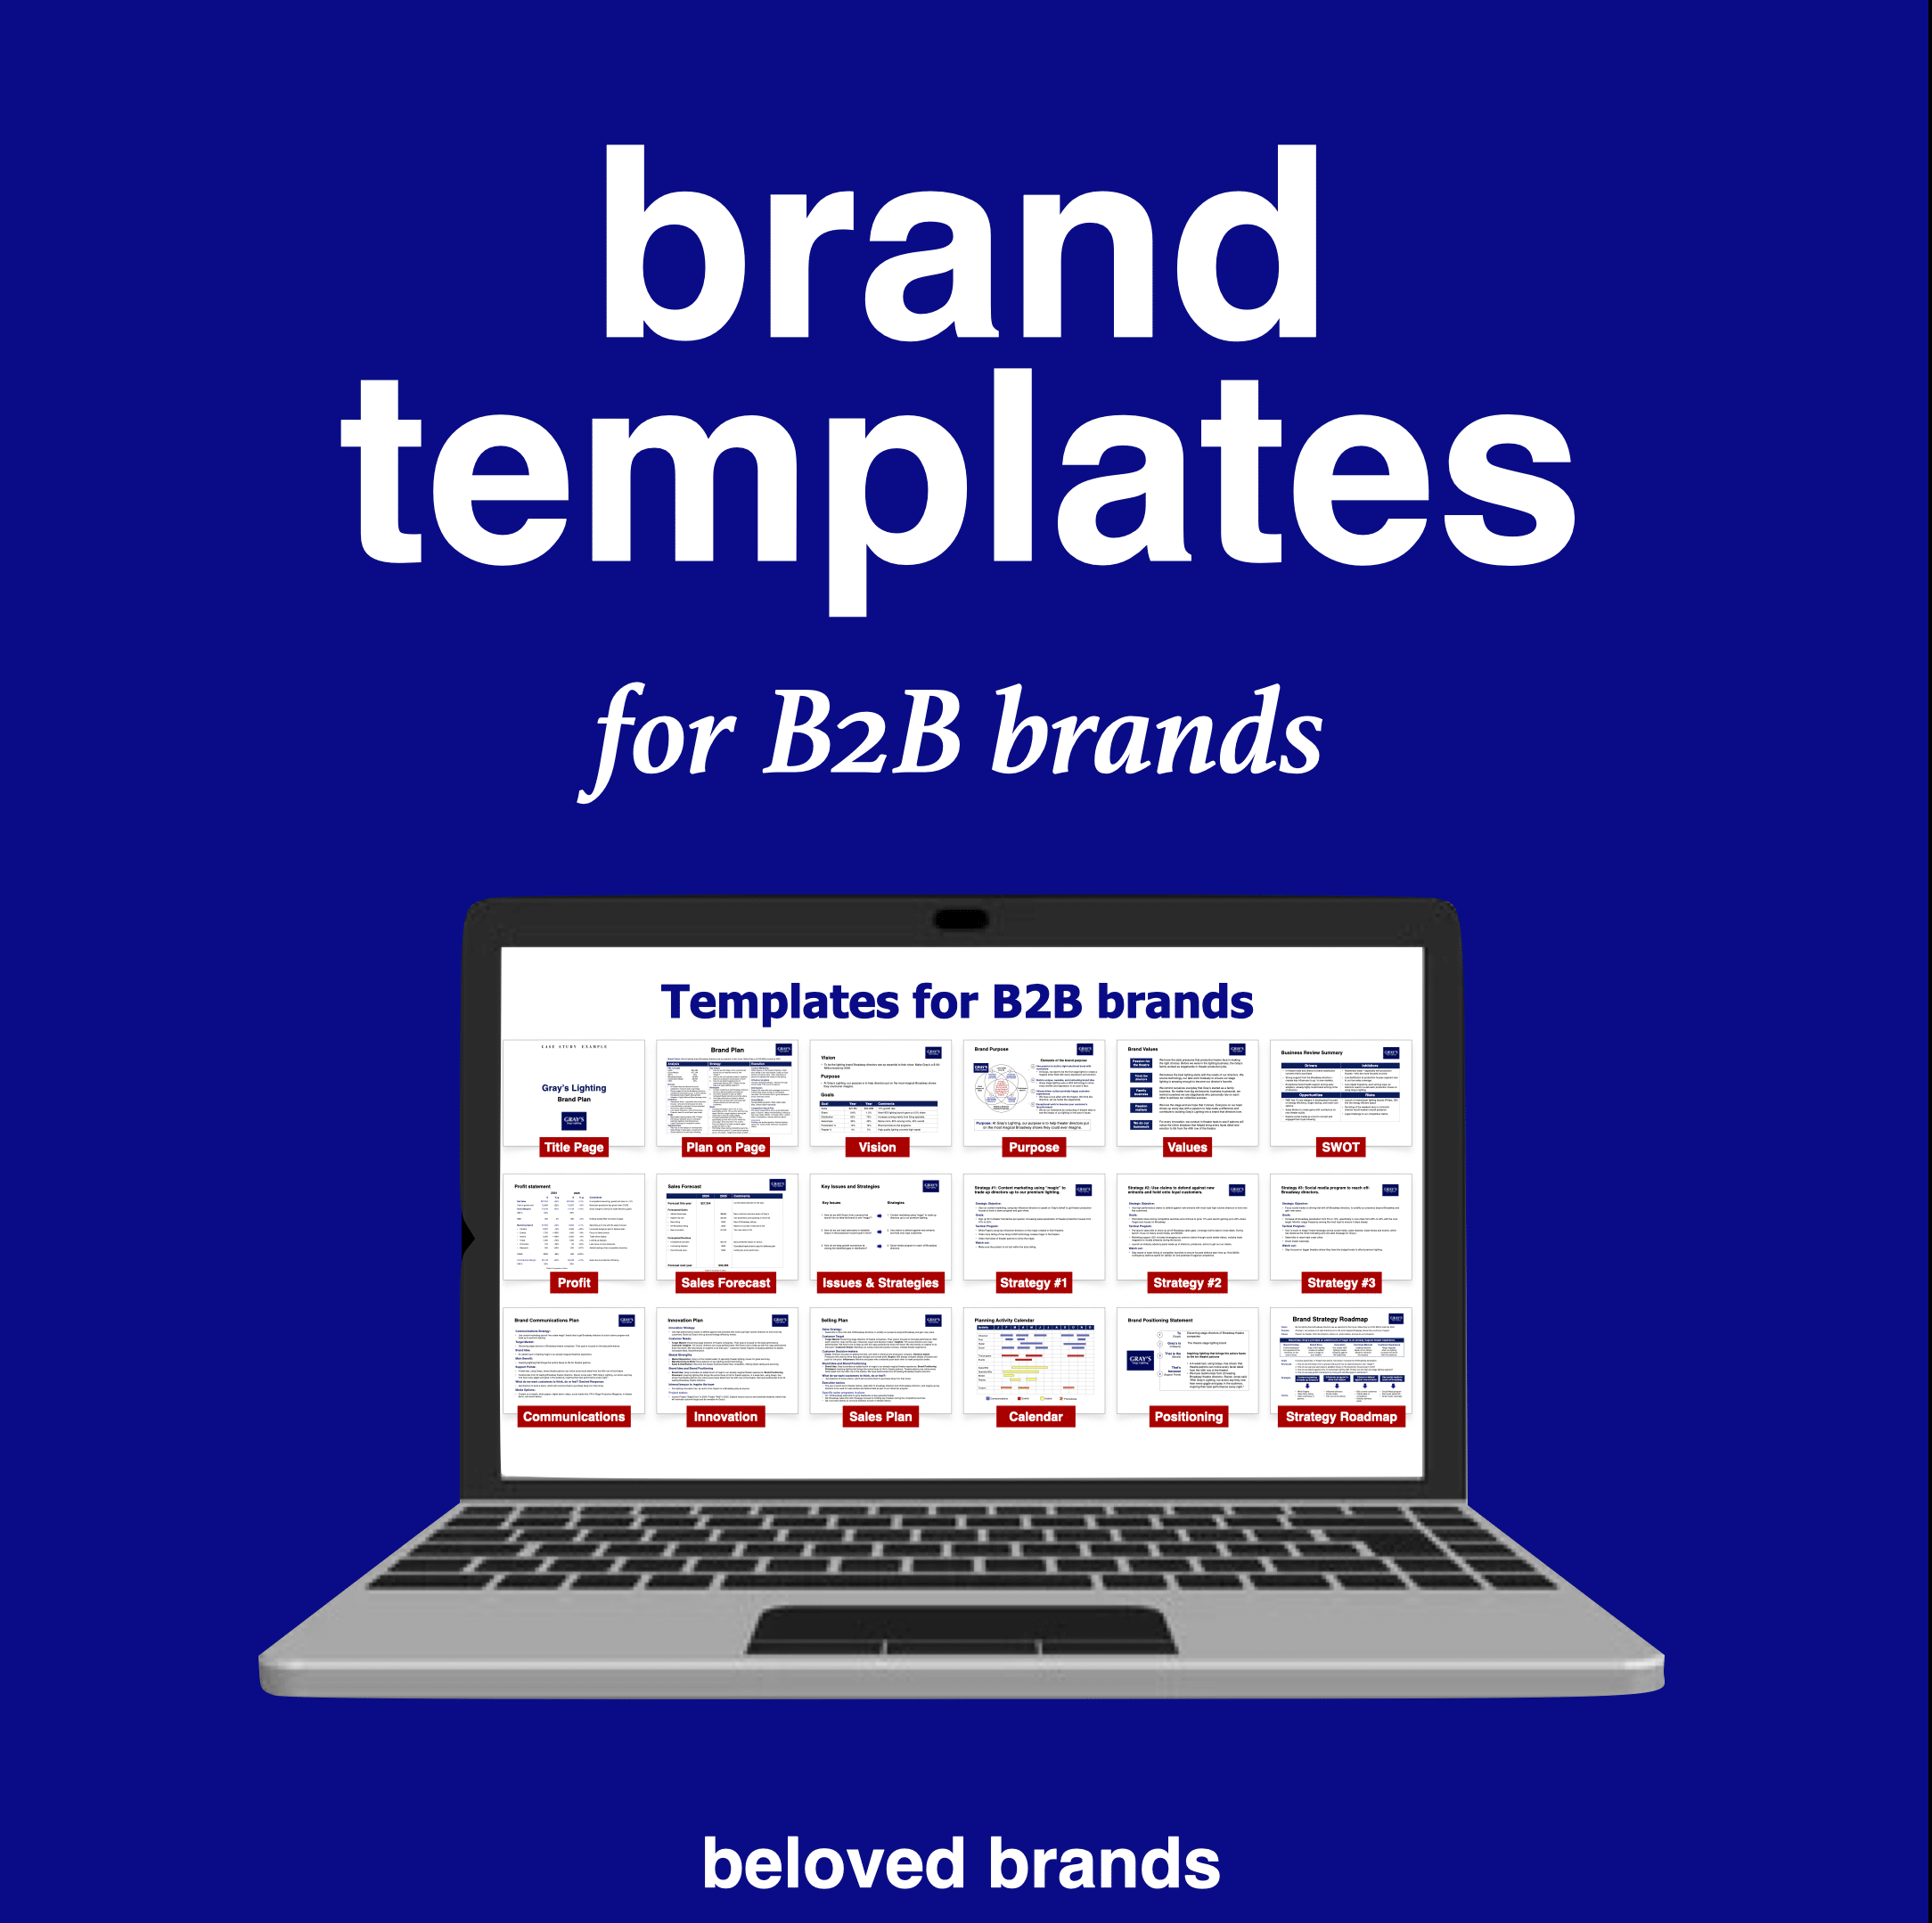 brand templates for B2B brands